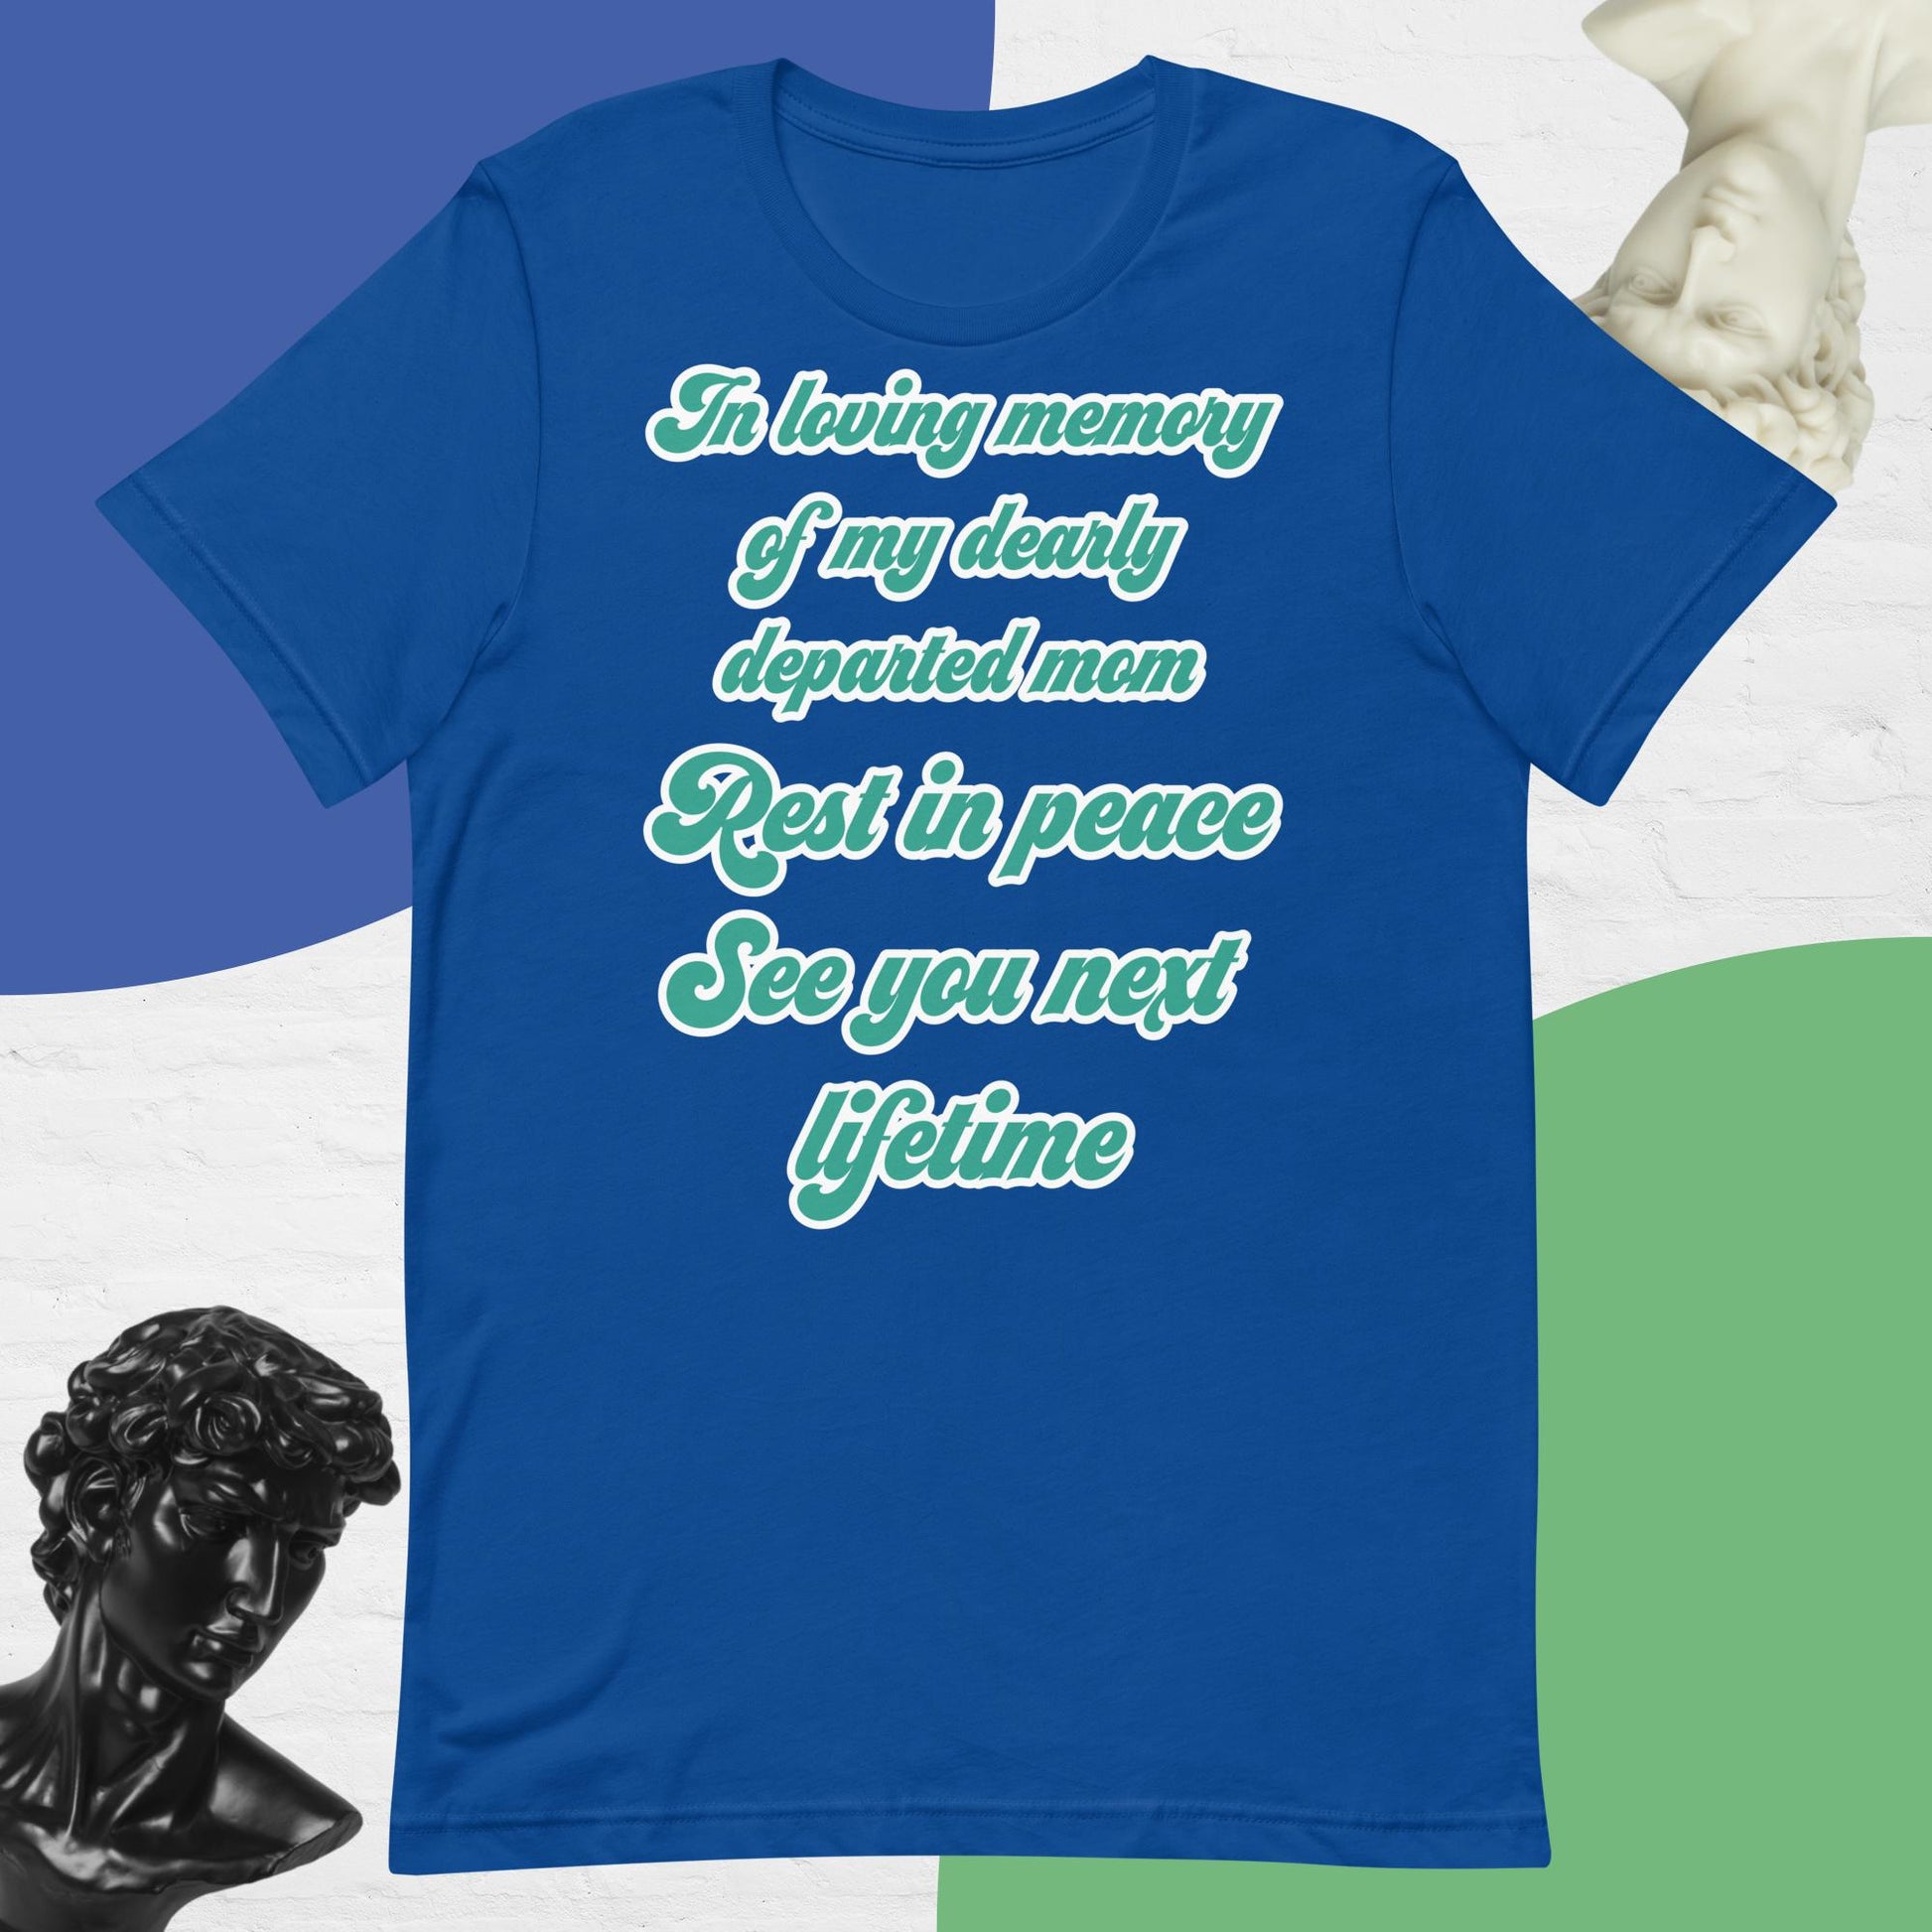 Bella + Canvas 3001 t-shirt. True royal blue colored, front view. White, green, and black scripted written quote "In loving memory of my dearly departed mom. Rest in peace. See you next lifetime." Shown laying flat on a white, green, and blue background with black and white bust sculptures of people's head and necks. Jamilliah's Wisdom Is Timeless Shop - wisdomistimeless.com.